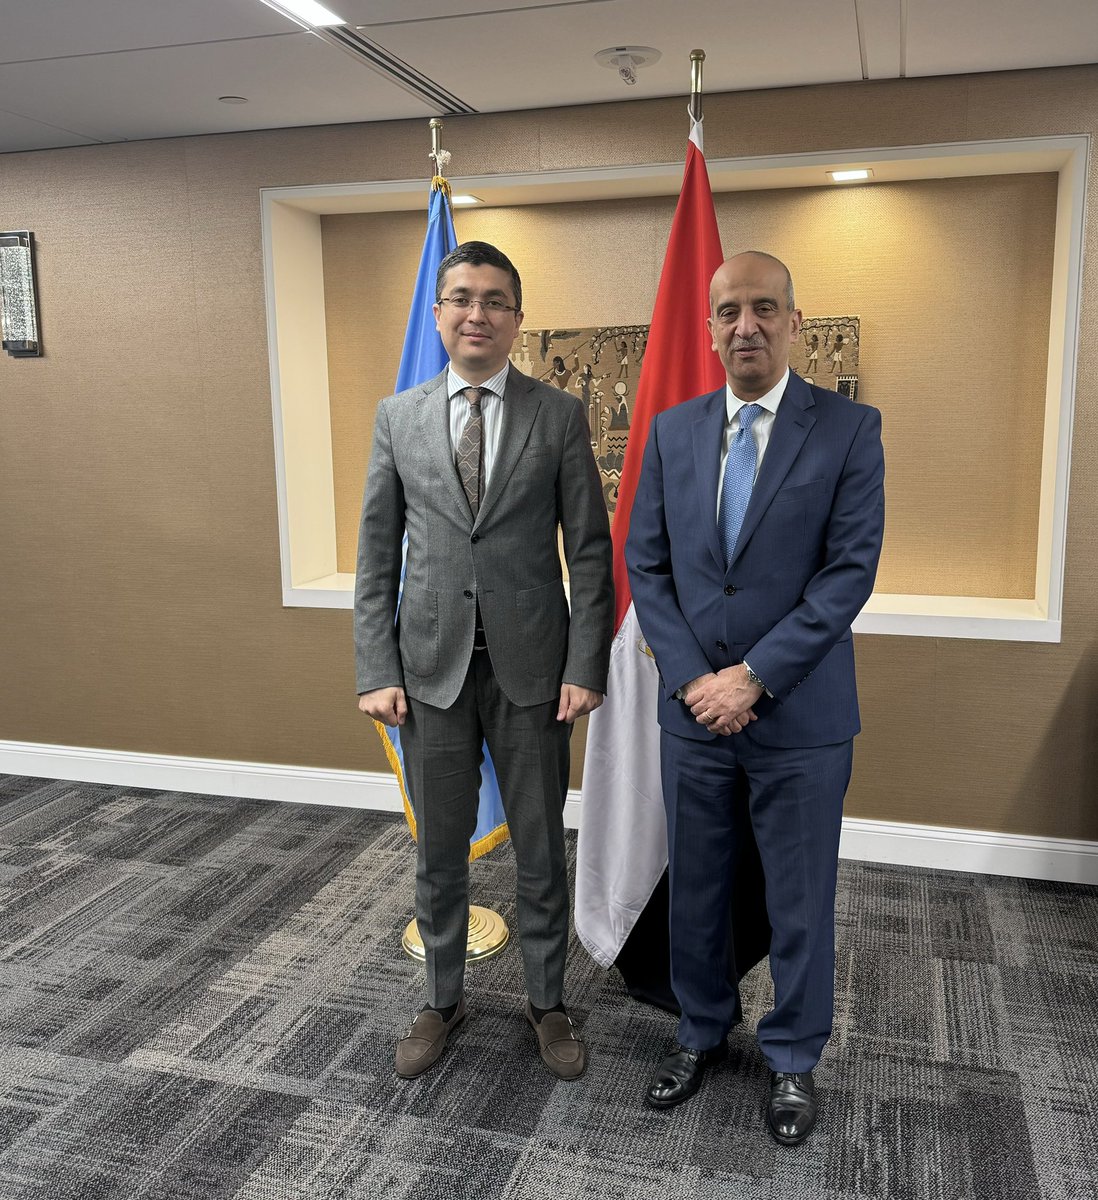 Visited the @UNEgypt and had a very productive meeting w/ Amb. Osama M. Abdelkhalek @EgyptPRNewYork. Explored the ways of promoting the initiatives of both 🇺🇿 and 🇪🇬 at the #UN.

@Uzbekistanun